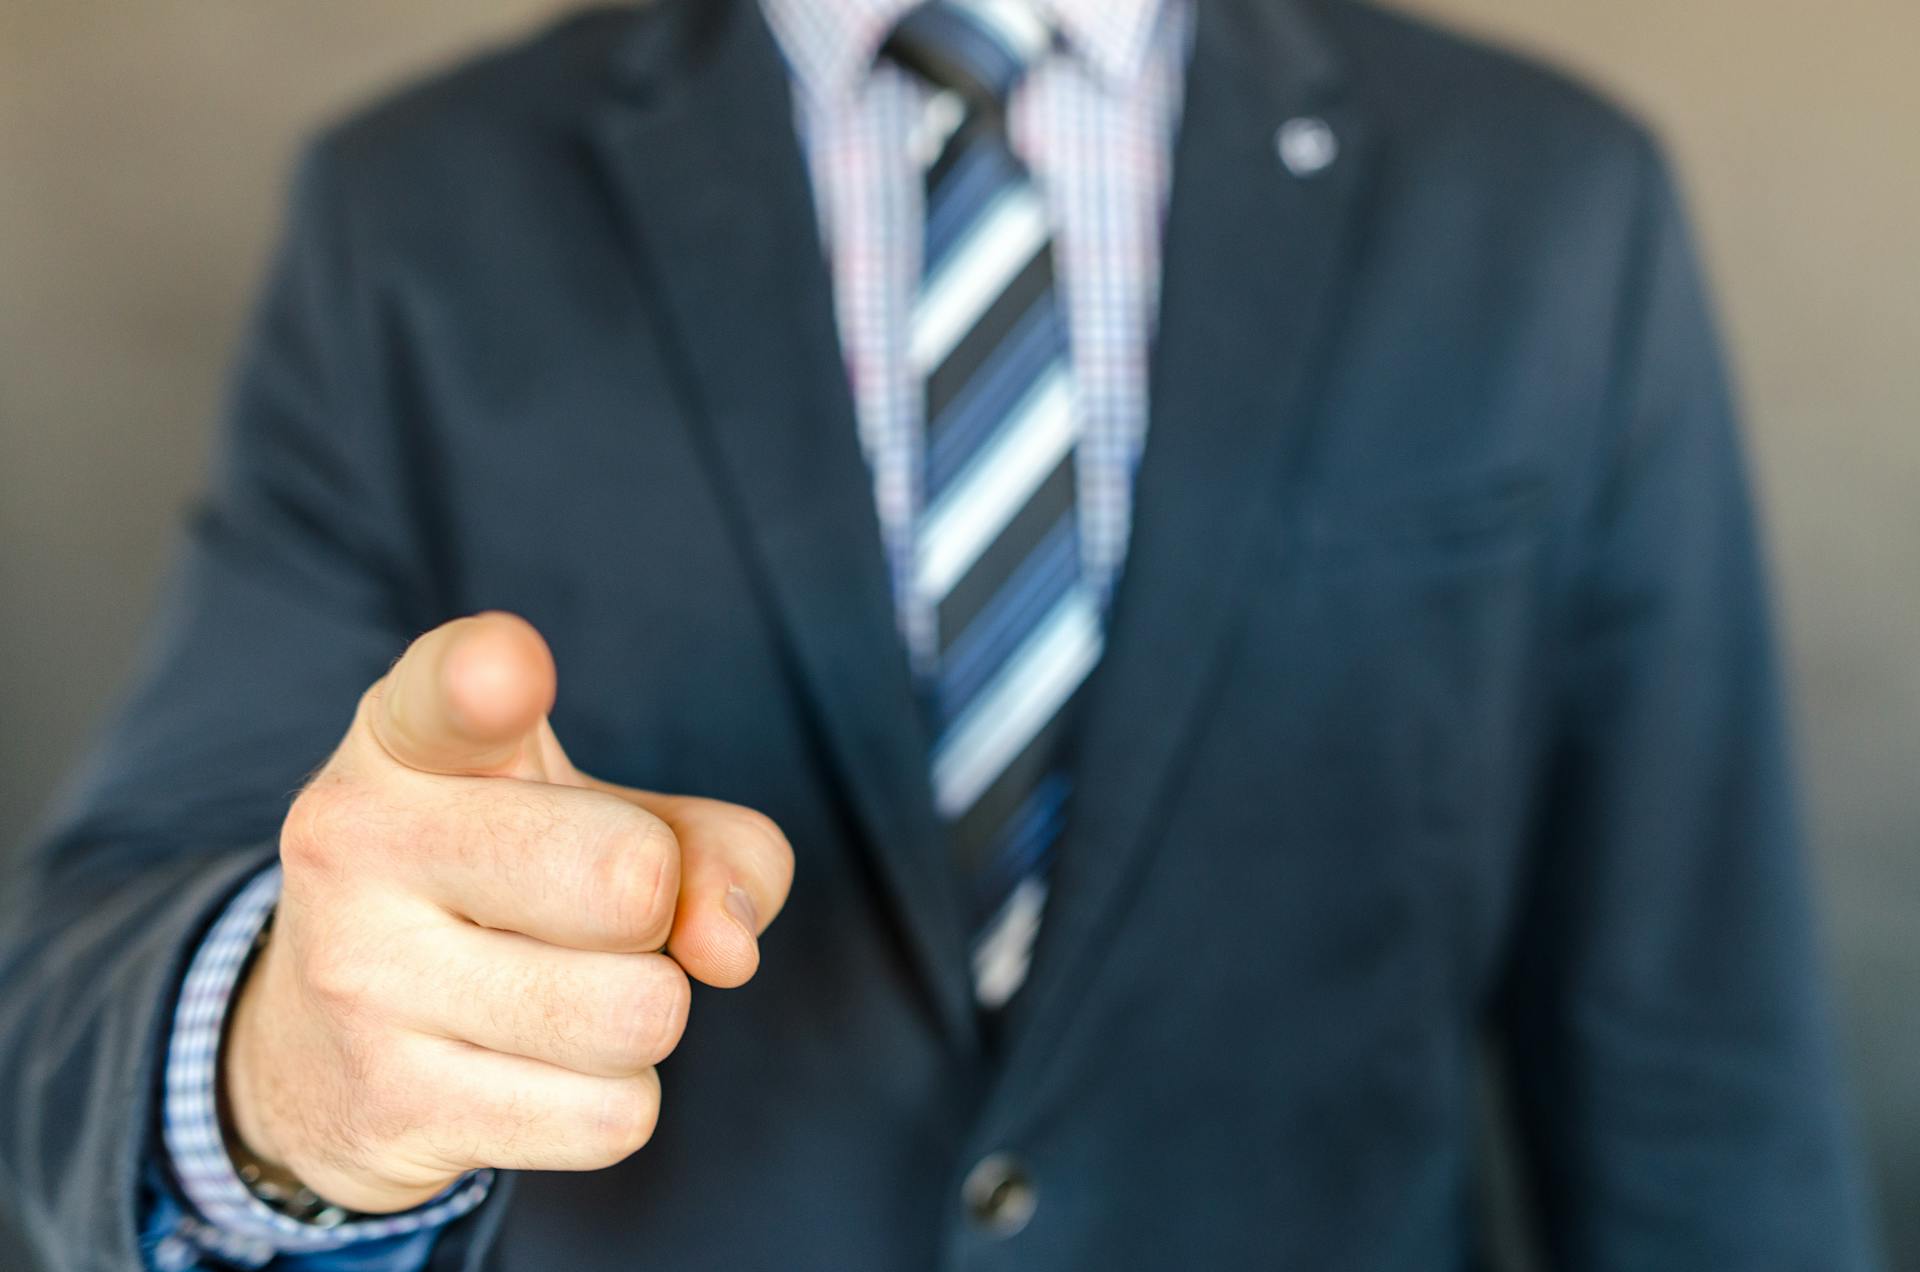 Man in suit pointing his finger | Source: Pexels